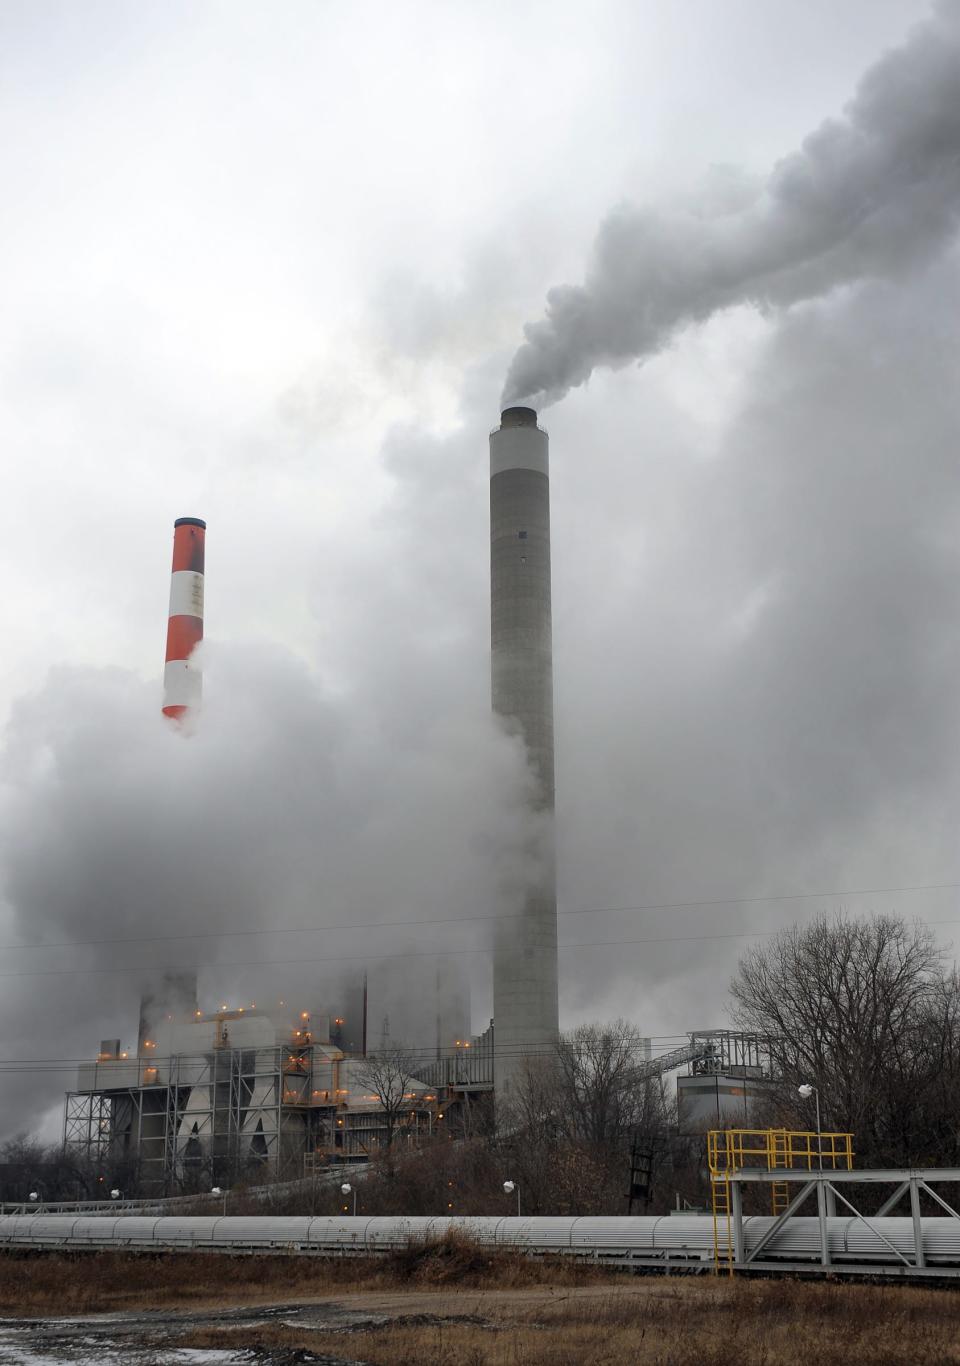 Indianapolis Power &amp; Light Co. announced in August 2015 that its coal-fired Harding Street power plant will be converted to natural gas, reducing carbon emissions at the city’s biggest industrial polluter by half.